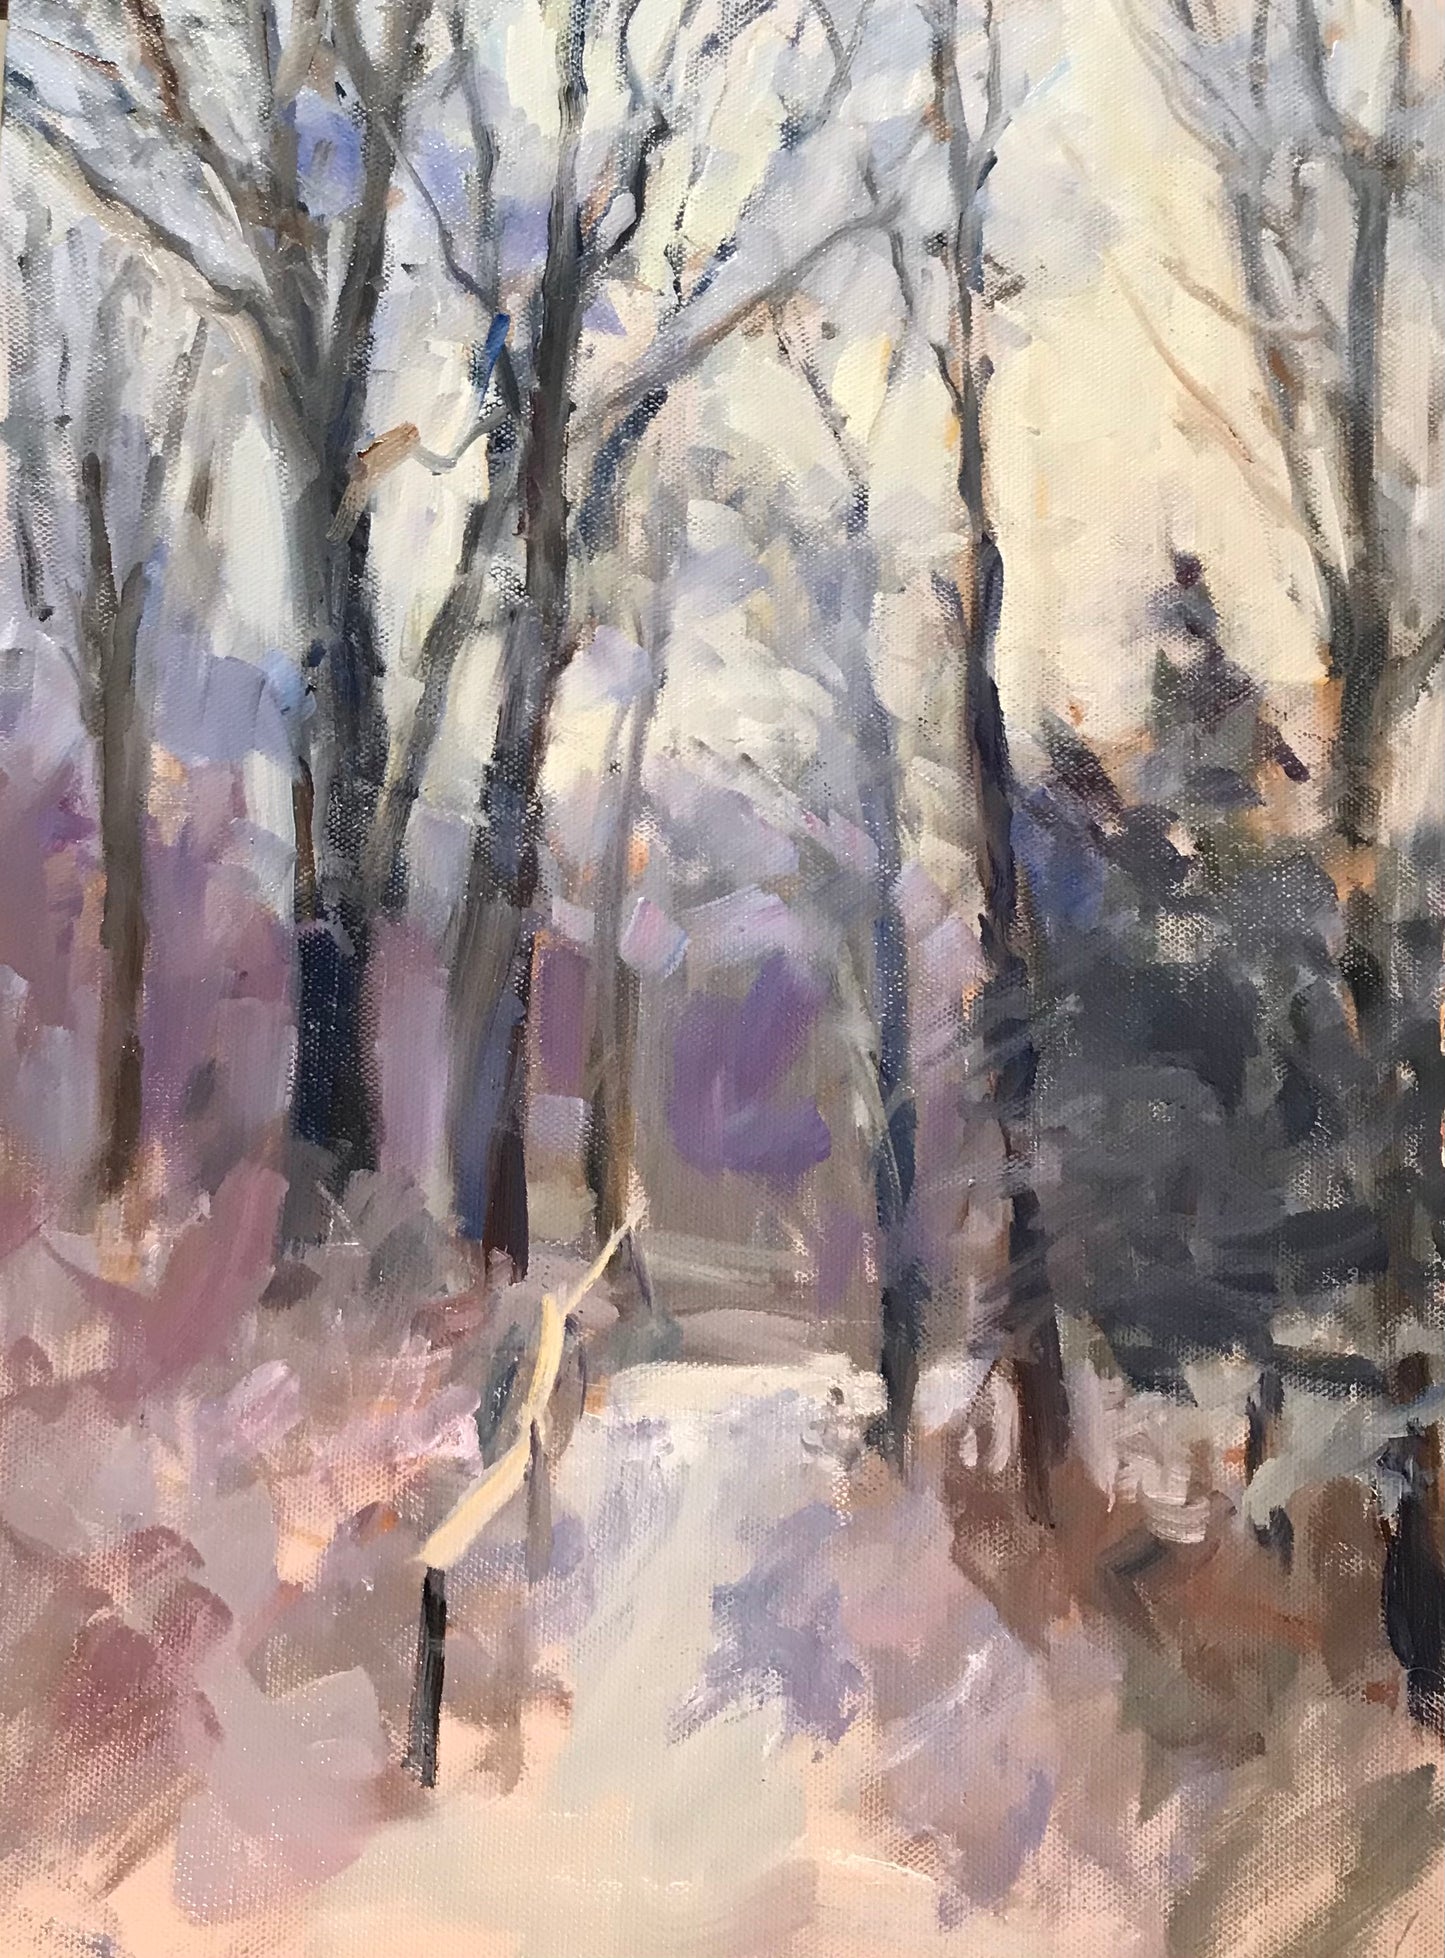 Maples and Path in Winter (16 x 12 inches)